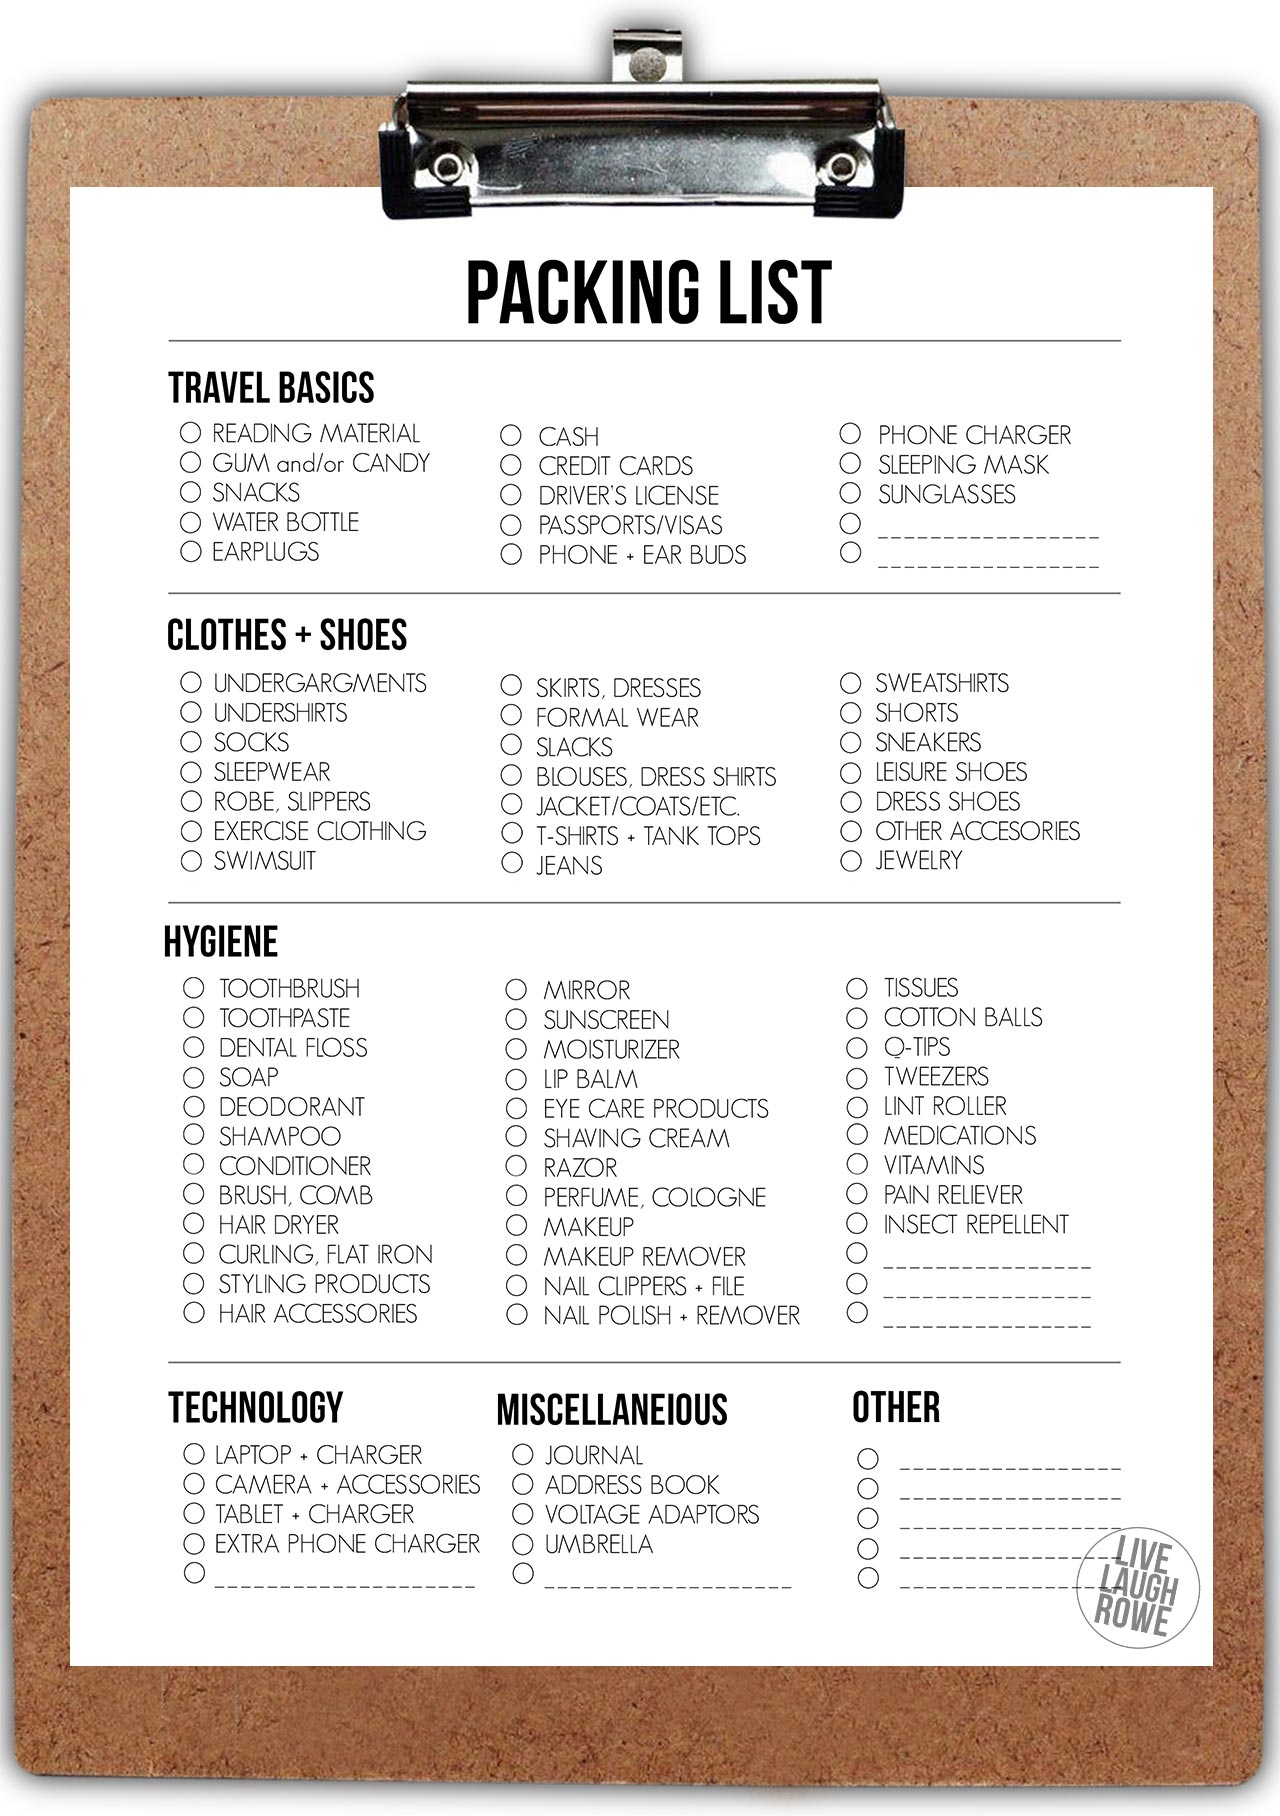 Packing List on Clipboard